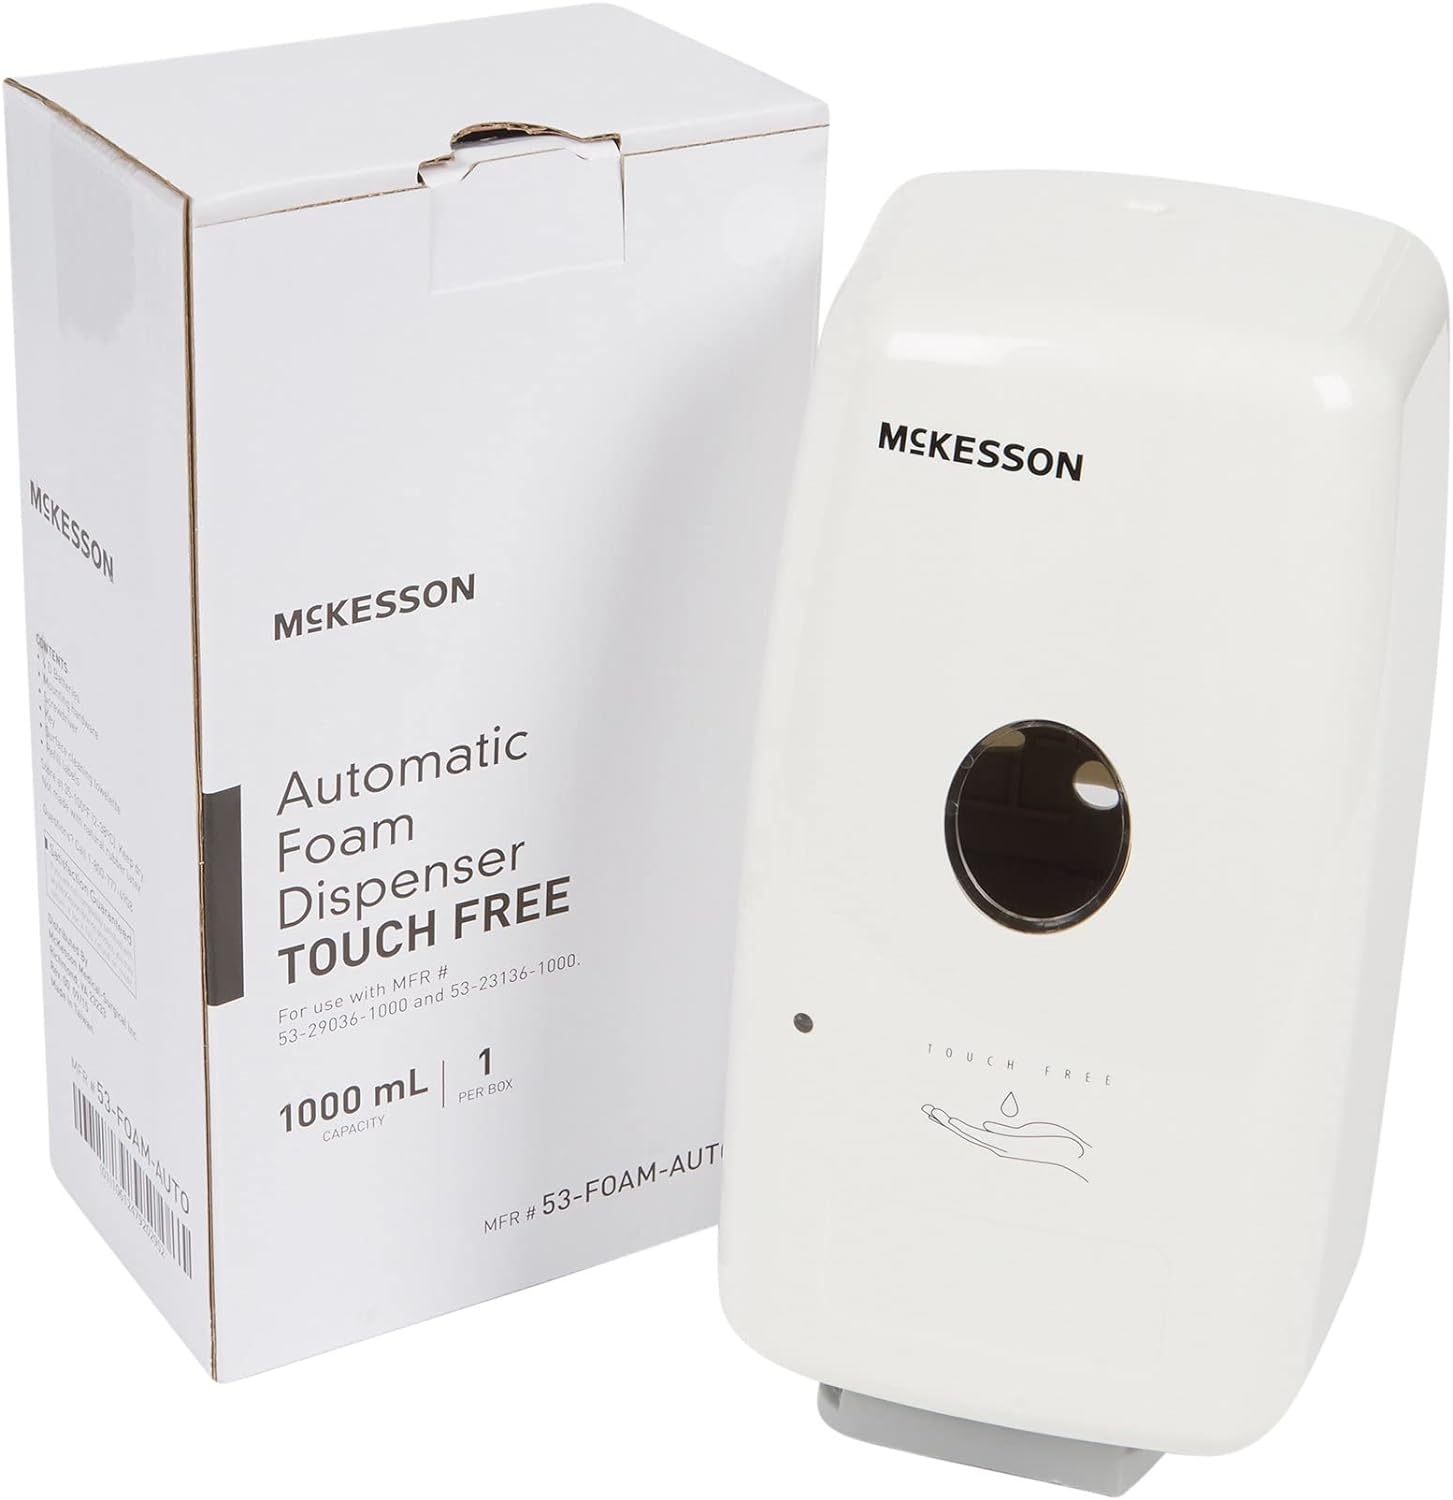 McKesson Automatic Soap Dispenser for Foam Soap, Hand Sanitizer, Touchless Foam Dispenser, Wall Mounted for Hallways, Offices, Schools, 1000 mL, 1 Count